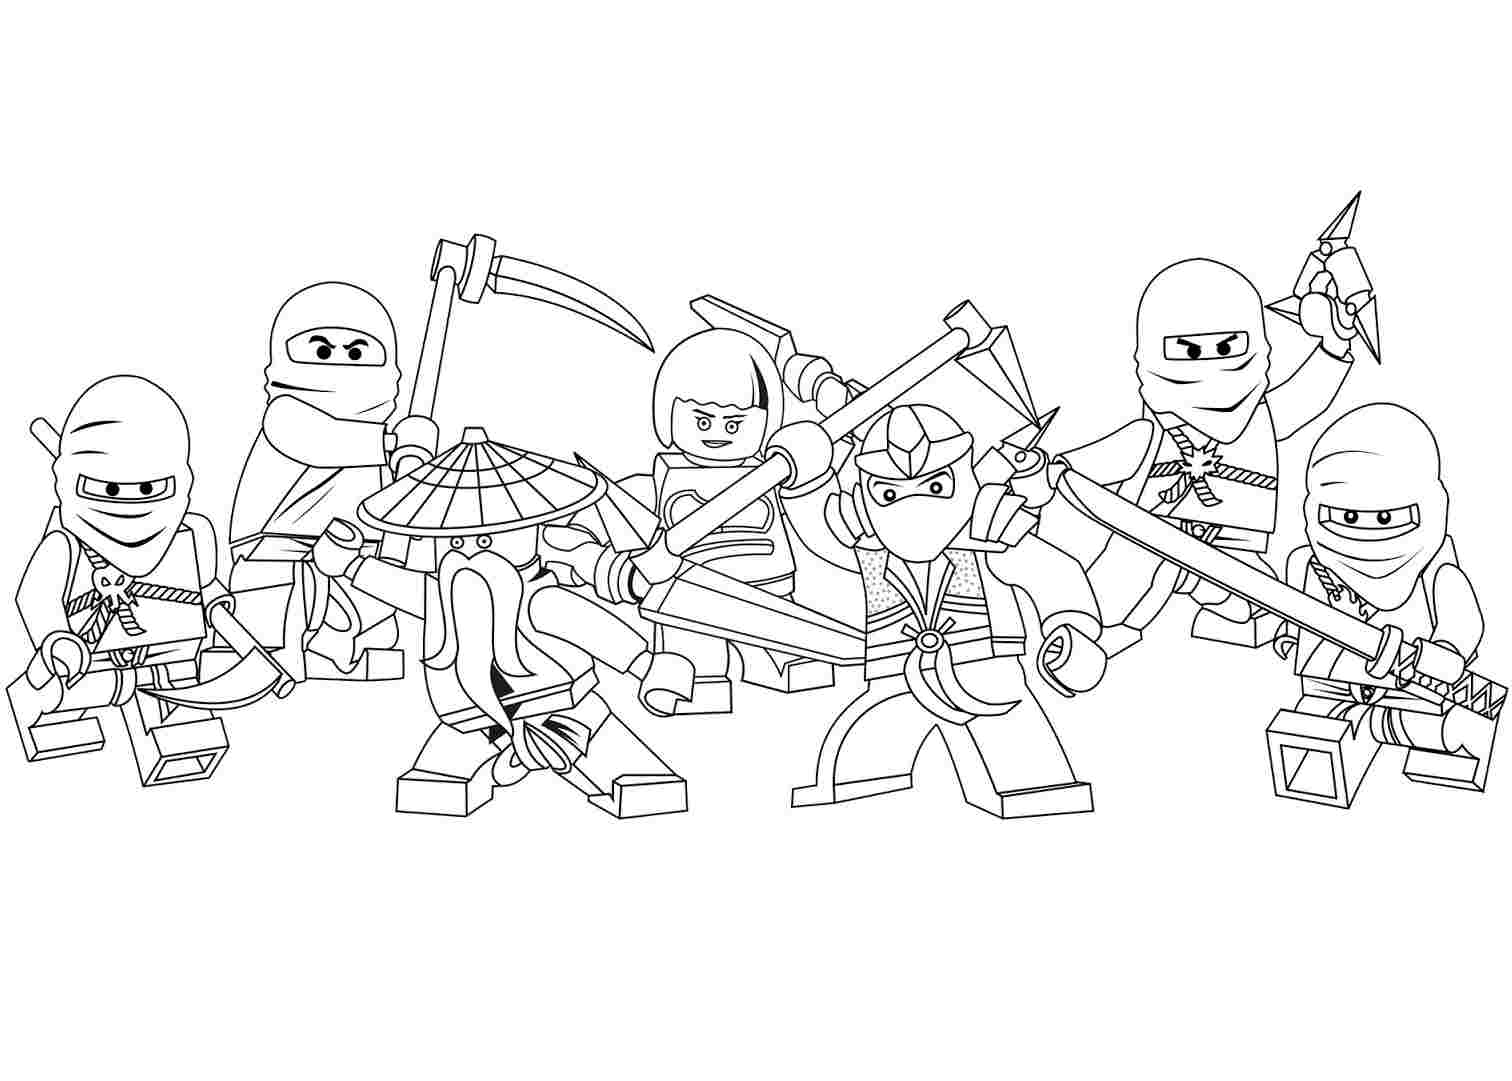 Team of Master Wu from Lego Ninjago Coloring Pages - Cartoons Coloring